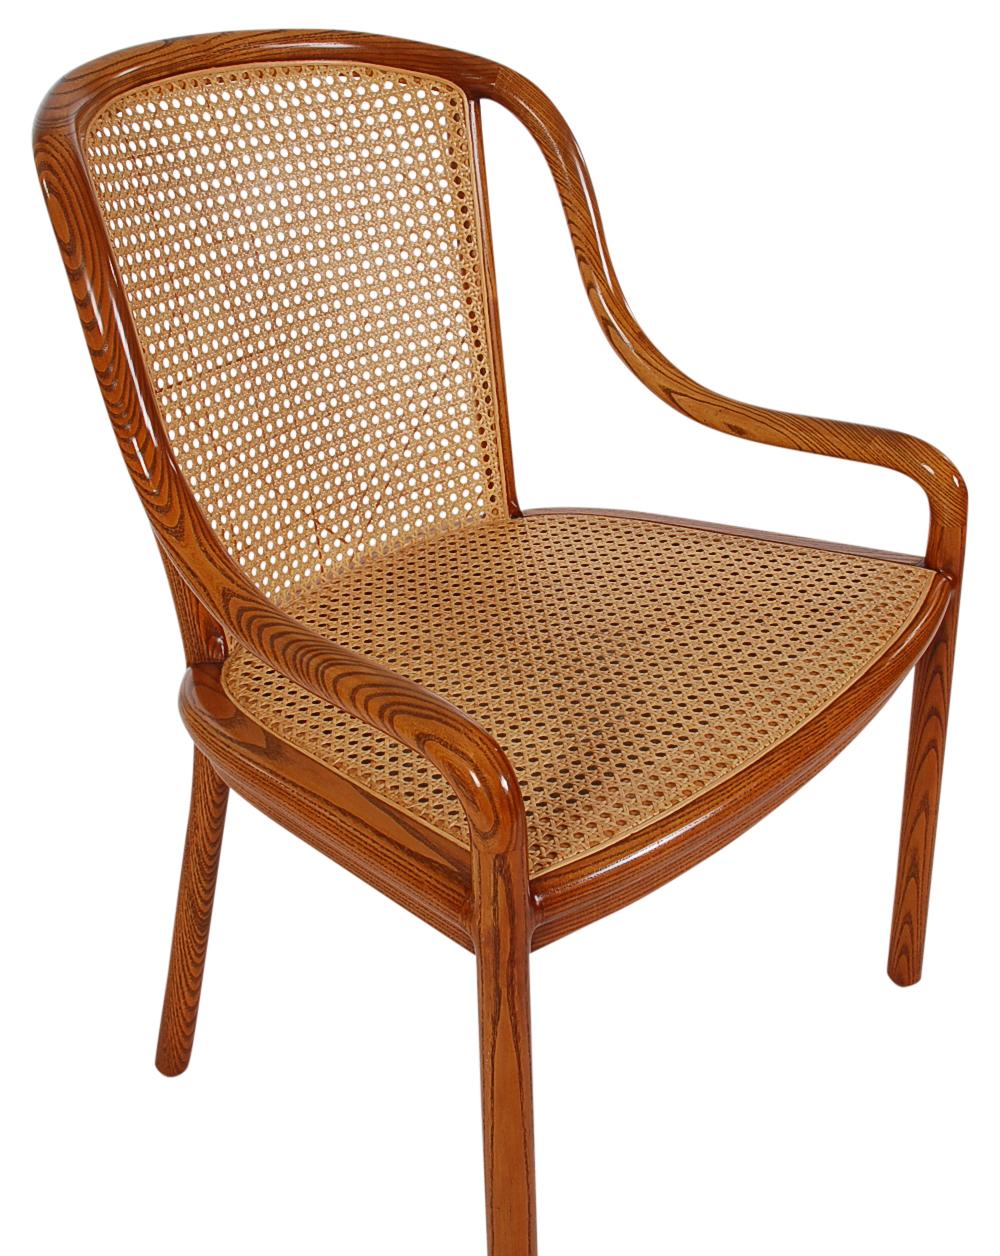 American Set of Four Mid-Century Modern Armchair Dining Chairs, Ward Bennet Cane and Oak